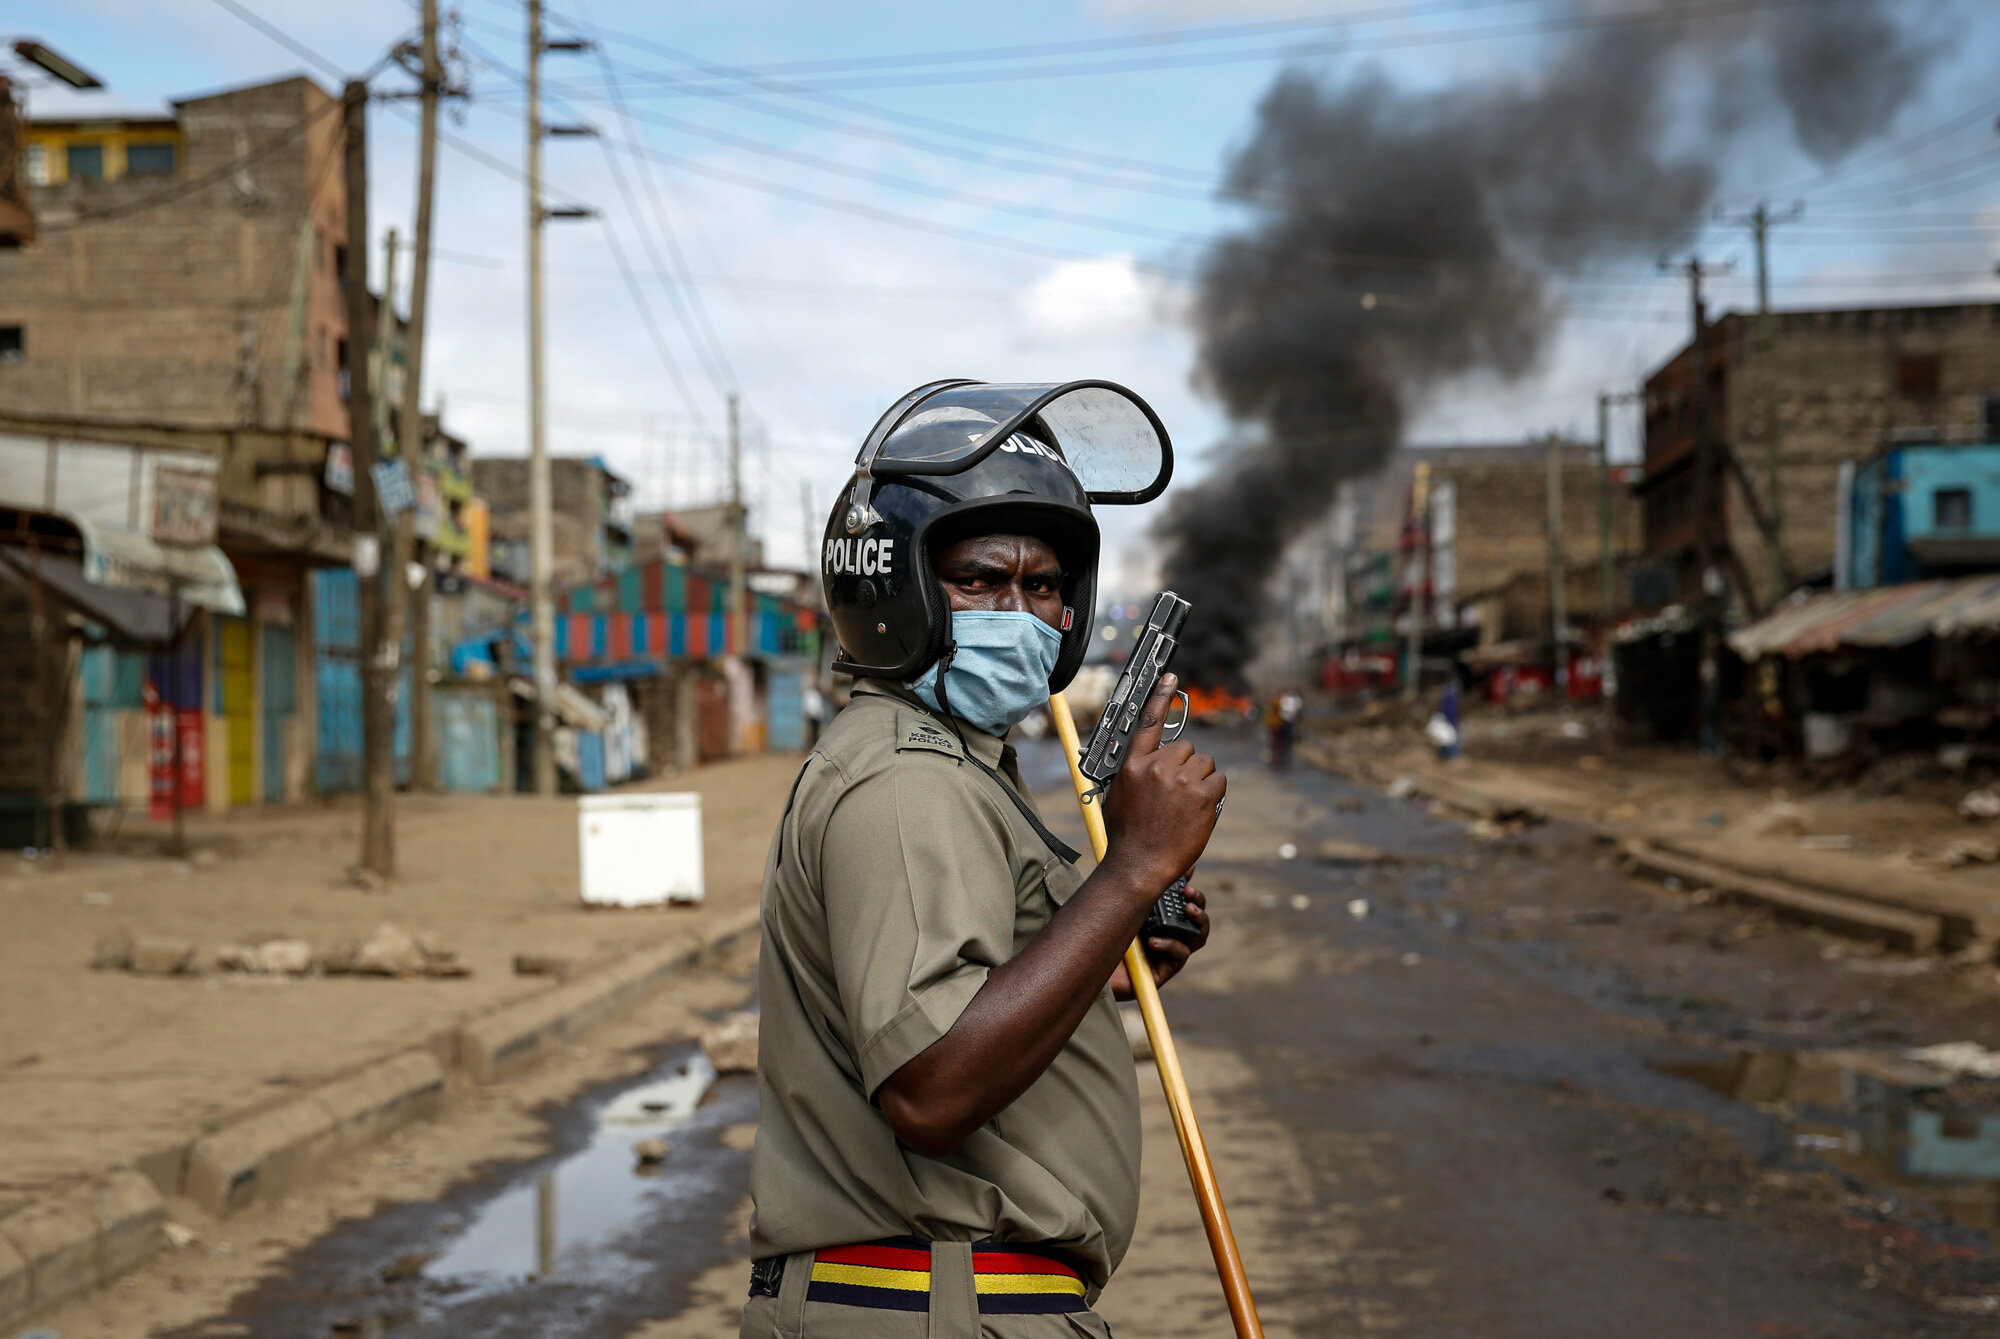  A police officer holds a pistol during clashes with protesters near a barricade of burning tires in the Kariobangi slum of Nairobi, Kenya, on May 8, 2020. Hundreds of protesters blocked one of the capital's major highways to protest government demol